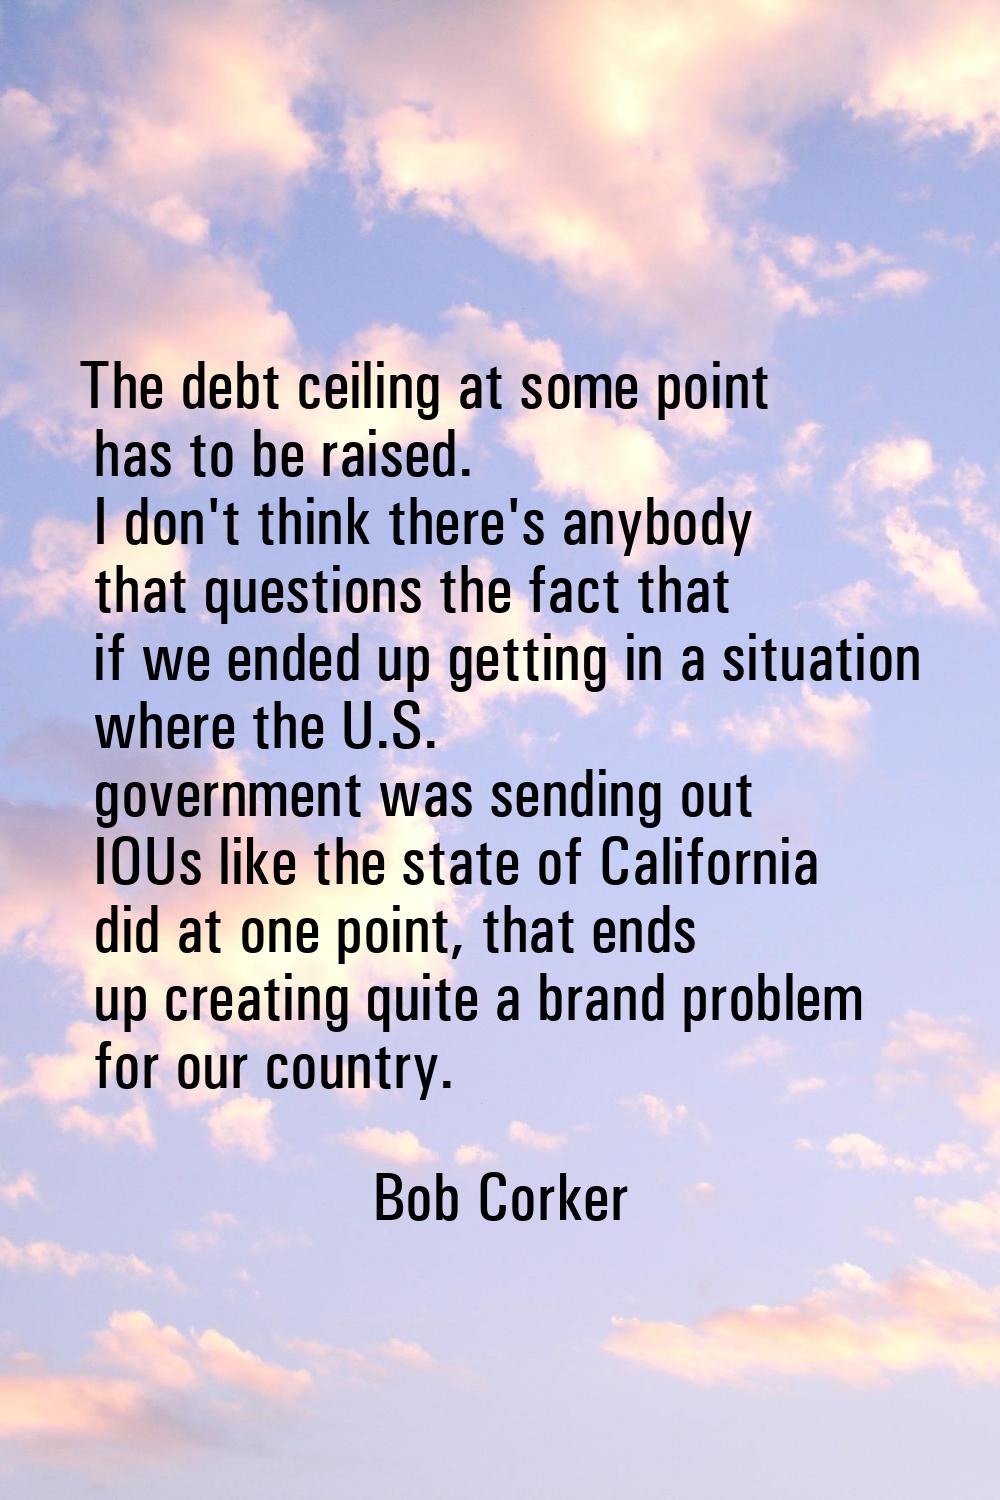 The debt ceiling at some point has to be raised. I don't think there's anybody that questions the f